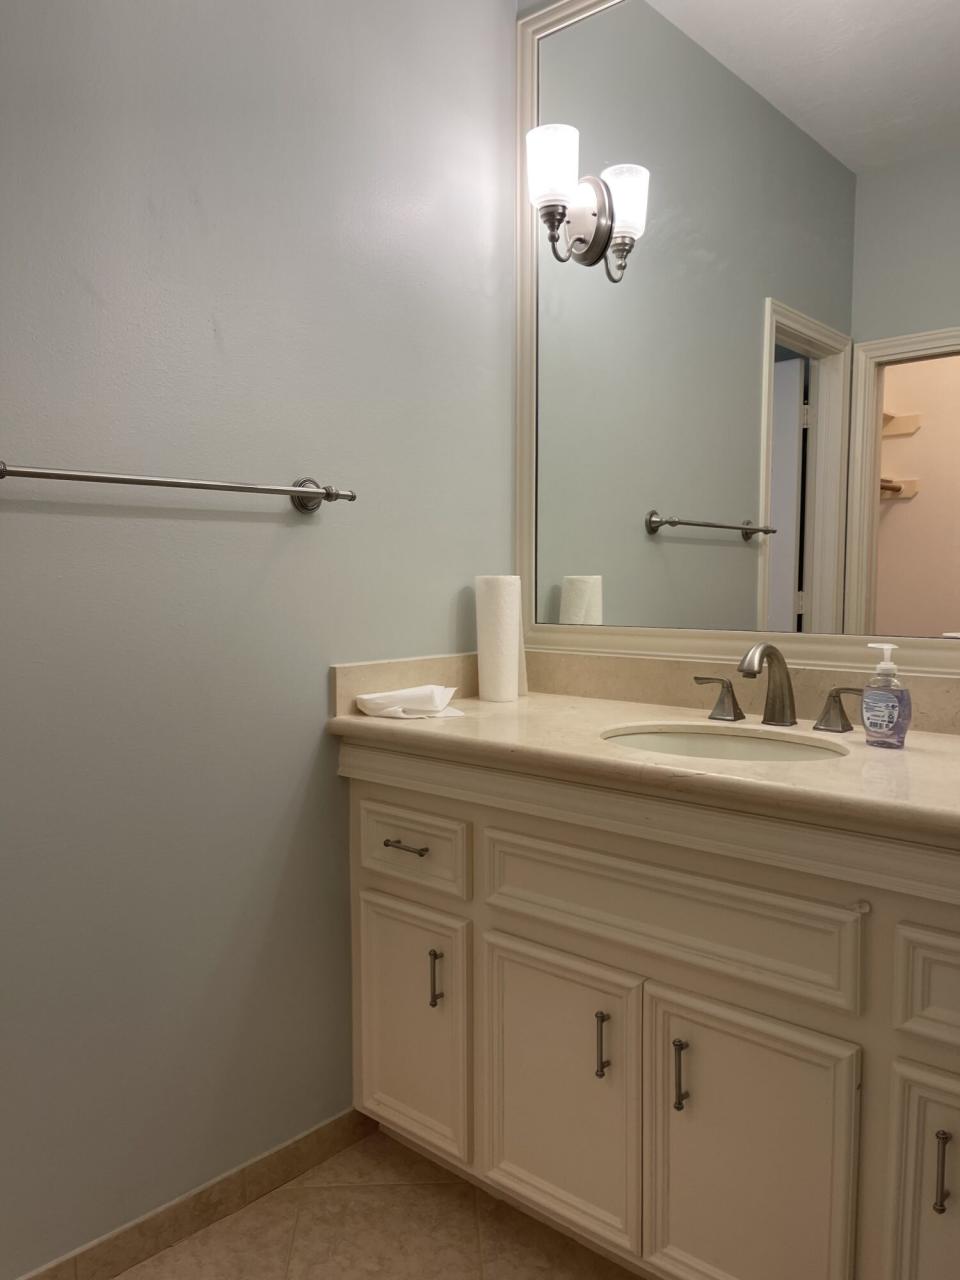 Bathroom before image with beige and white paint and vanity